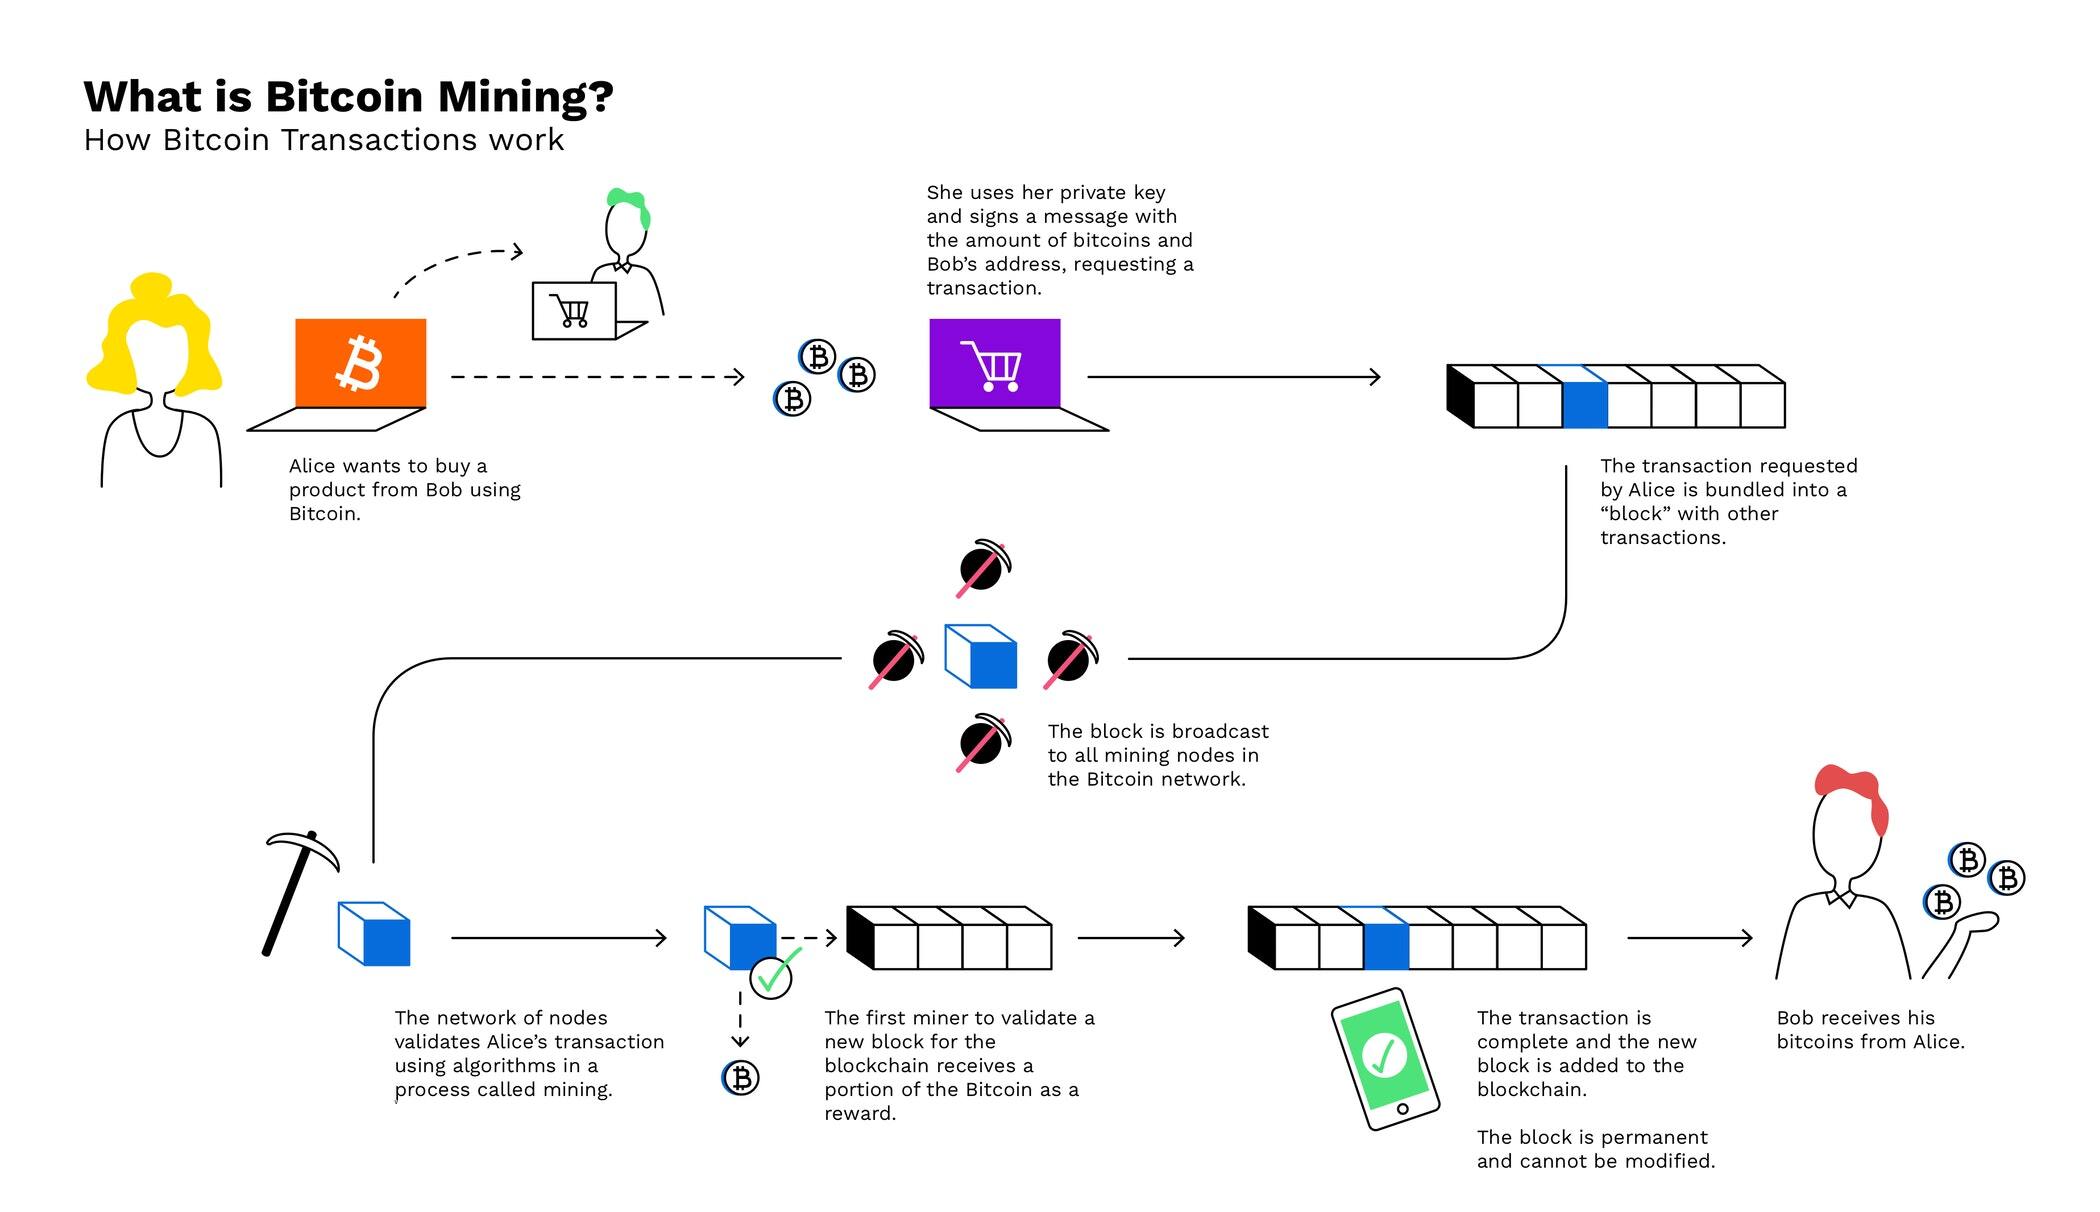 what is bitcoin and blockchain mining?